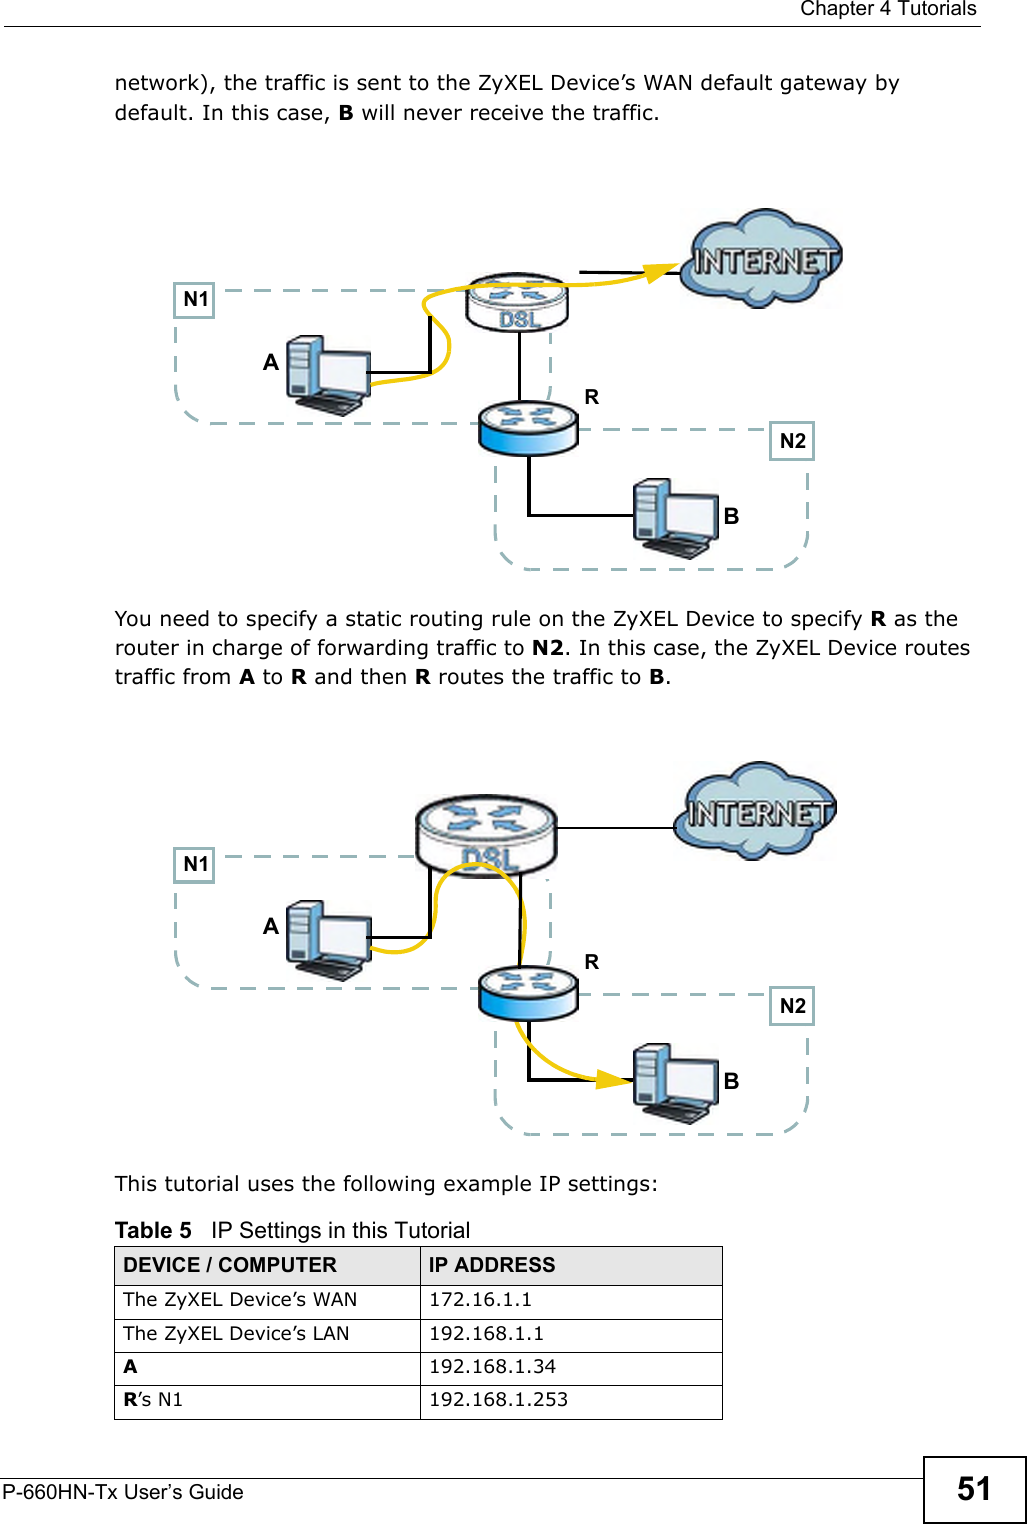  Chapter 4 TutorialsP-660HN-Tx User’s Guide 51network), the traffic is sent to the ZyXEL Device’s WAN default gateway by default. In this case, B will never receive the traffic.You need to specify a static routing rule on the ZyXEL Device to specify R as the router in charge of forwarding traffic to N2. In this case, the ZyXEL Device routes traffic from A to R and then R routes the traffic to B.This tutorial uses the following example IP settings:Table 5   IP Settings in this TutorialDEVICE / COMPUTER IP ADDRESSThe ZyXEL Device’s WAN 172.16.1.1The ZyXEL Device’s LAN 192.168.1.1A192.168.1.34R’s N1  192.168.1.253N2BN1ARN2BN1AR